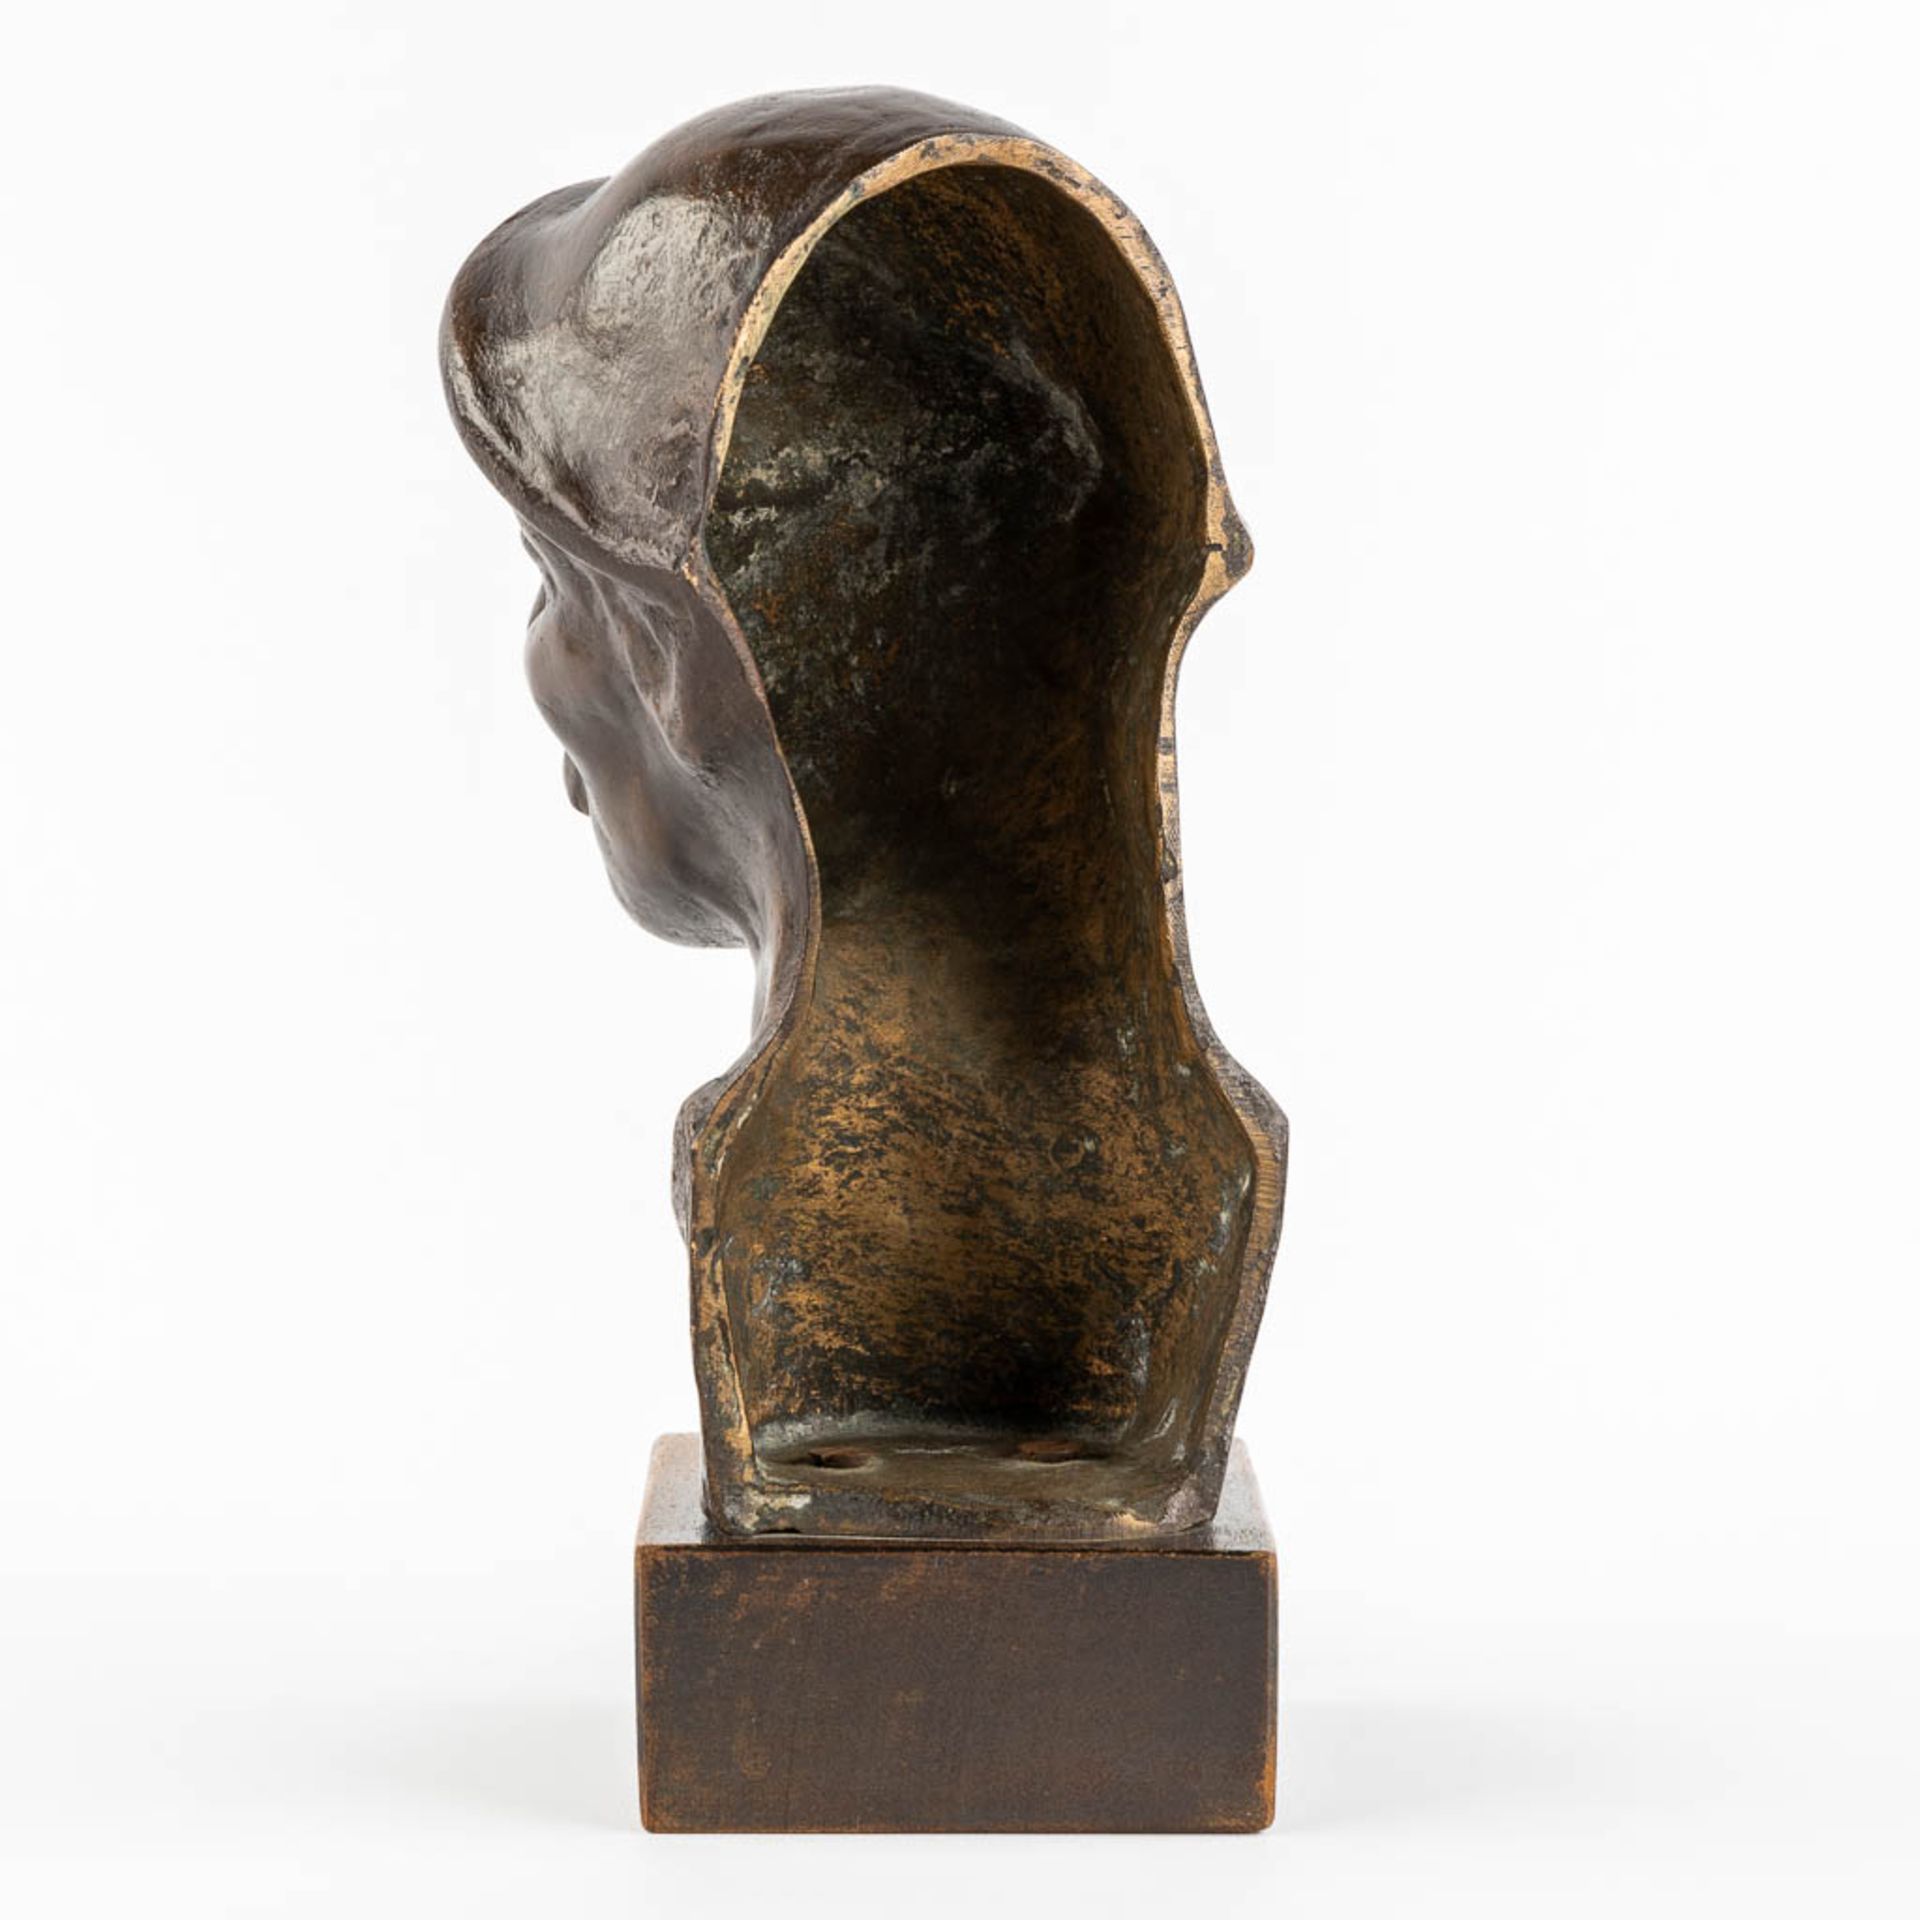 Georges WASTERLAIN (1889-1963) 'Mineur' patinated bronze. (L:11 x W:13 x H:26,5 cm) - Image 5 of 11